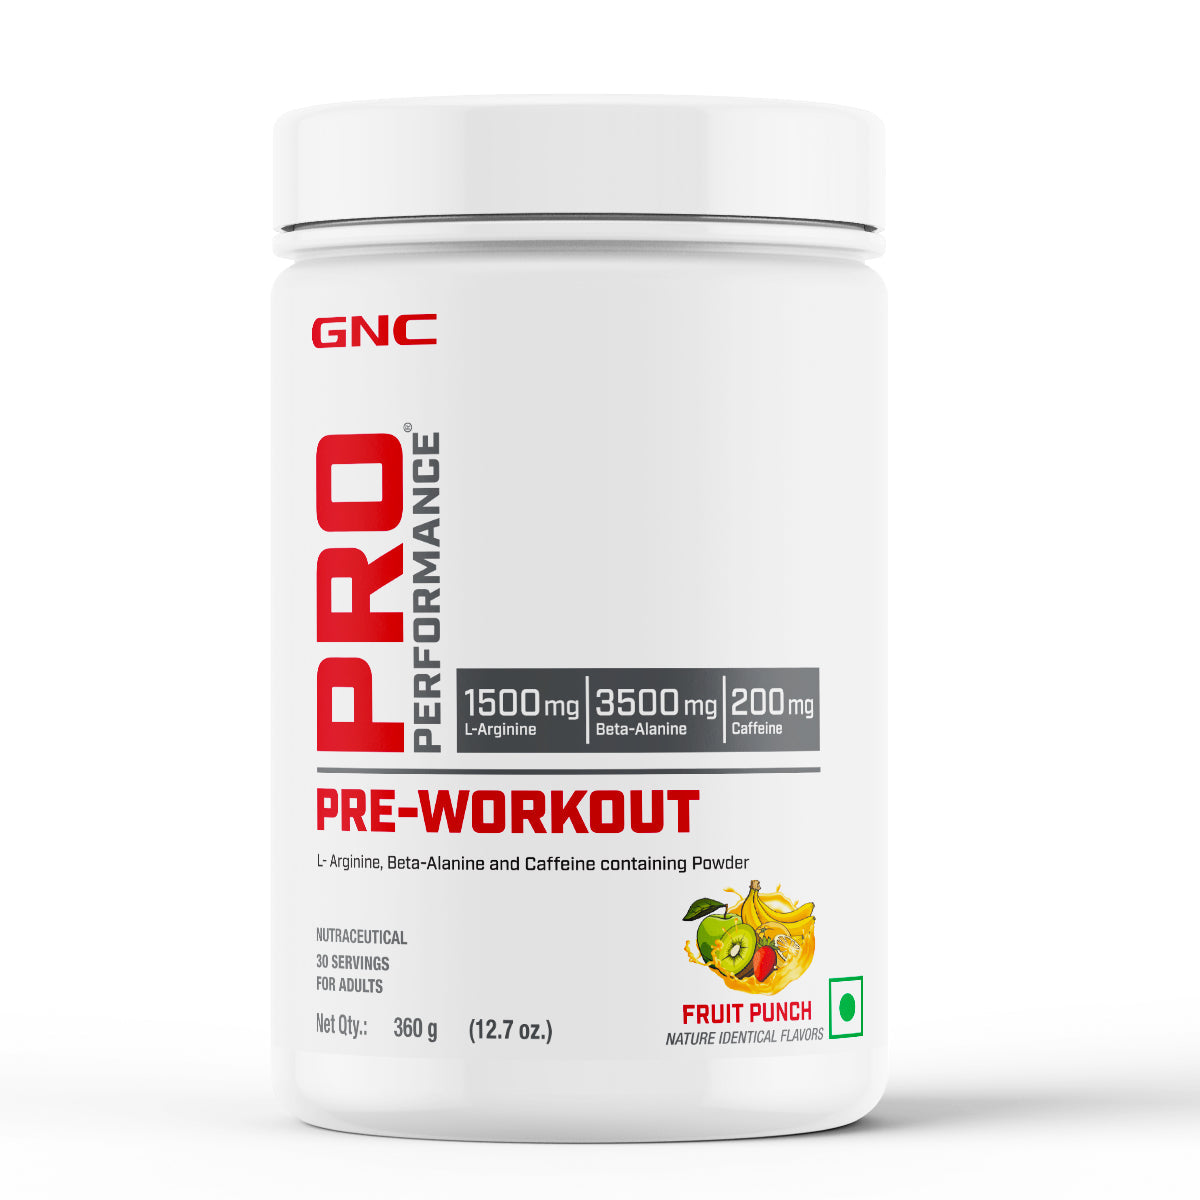 GNC Pro Performance Pre-Workout With Shaker - Helps Improve Energy to Support Intense Workout